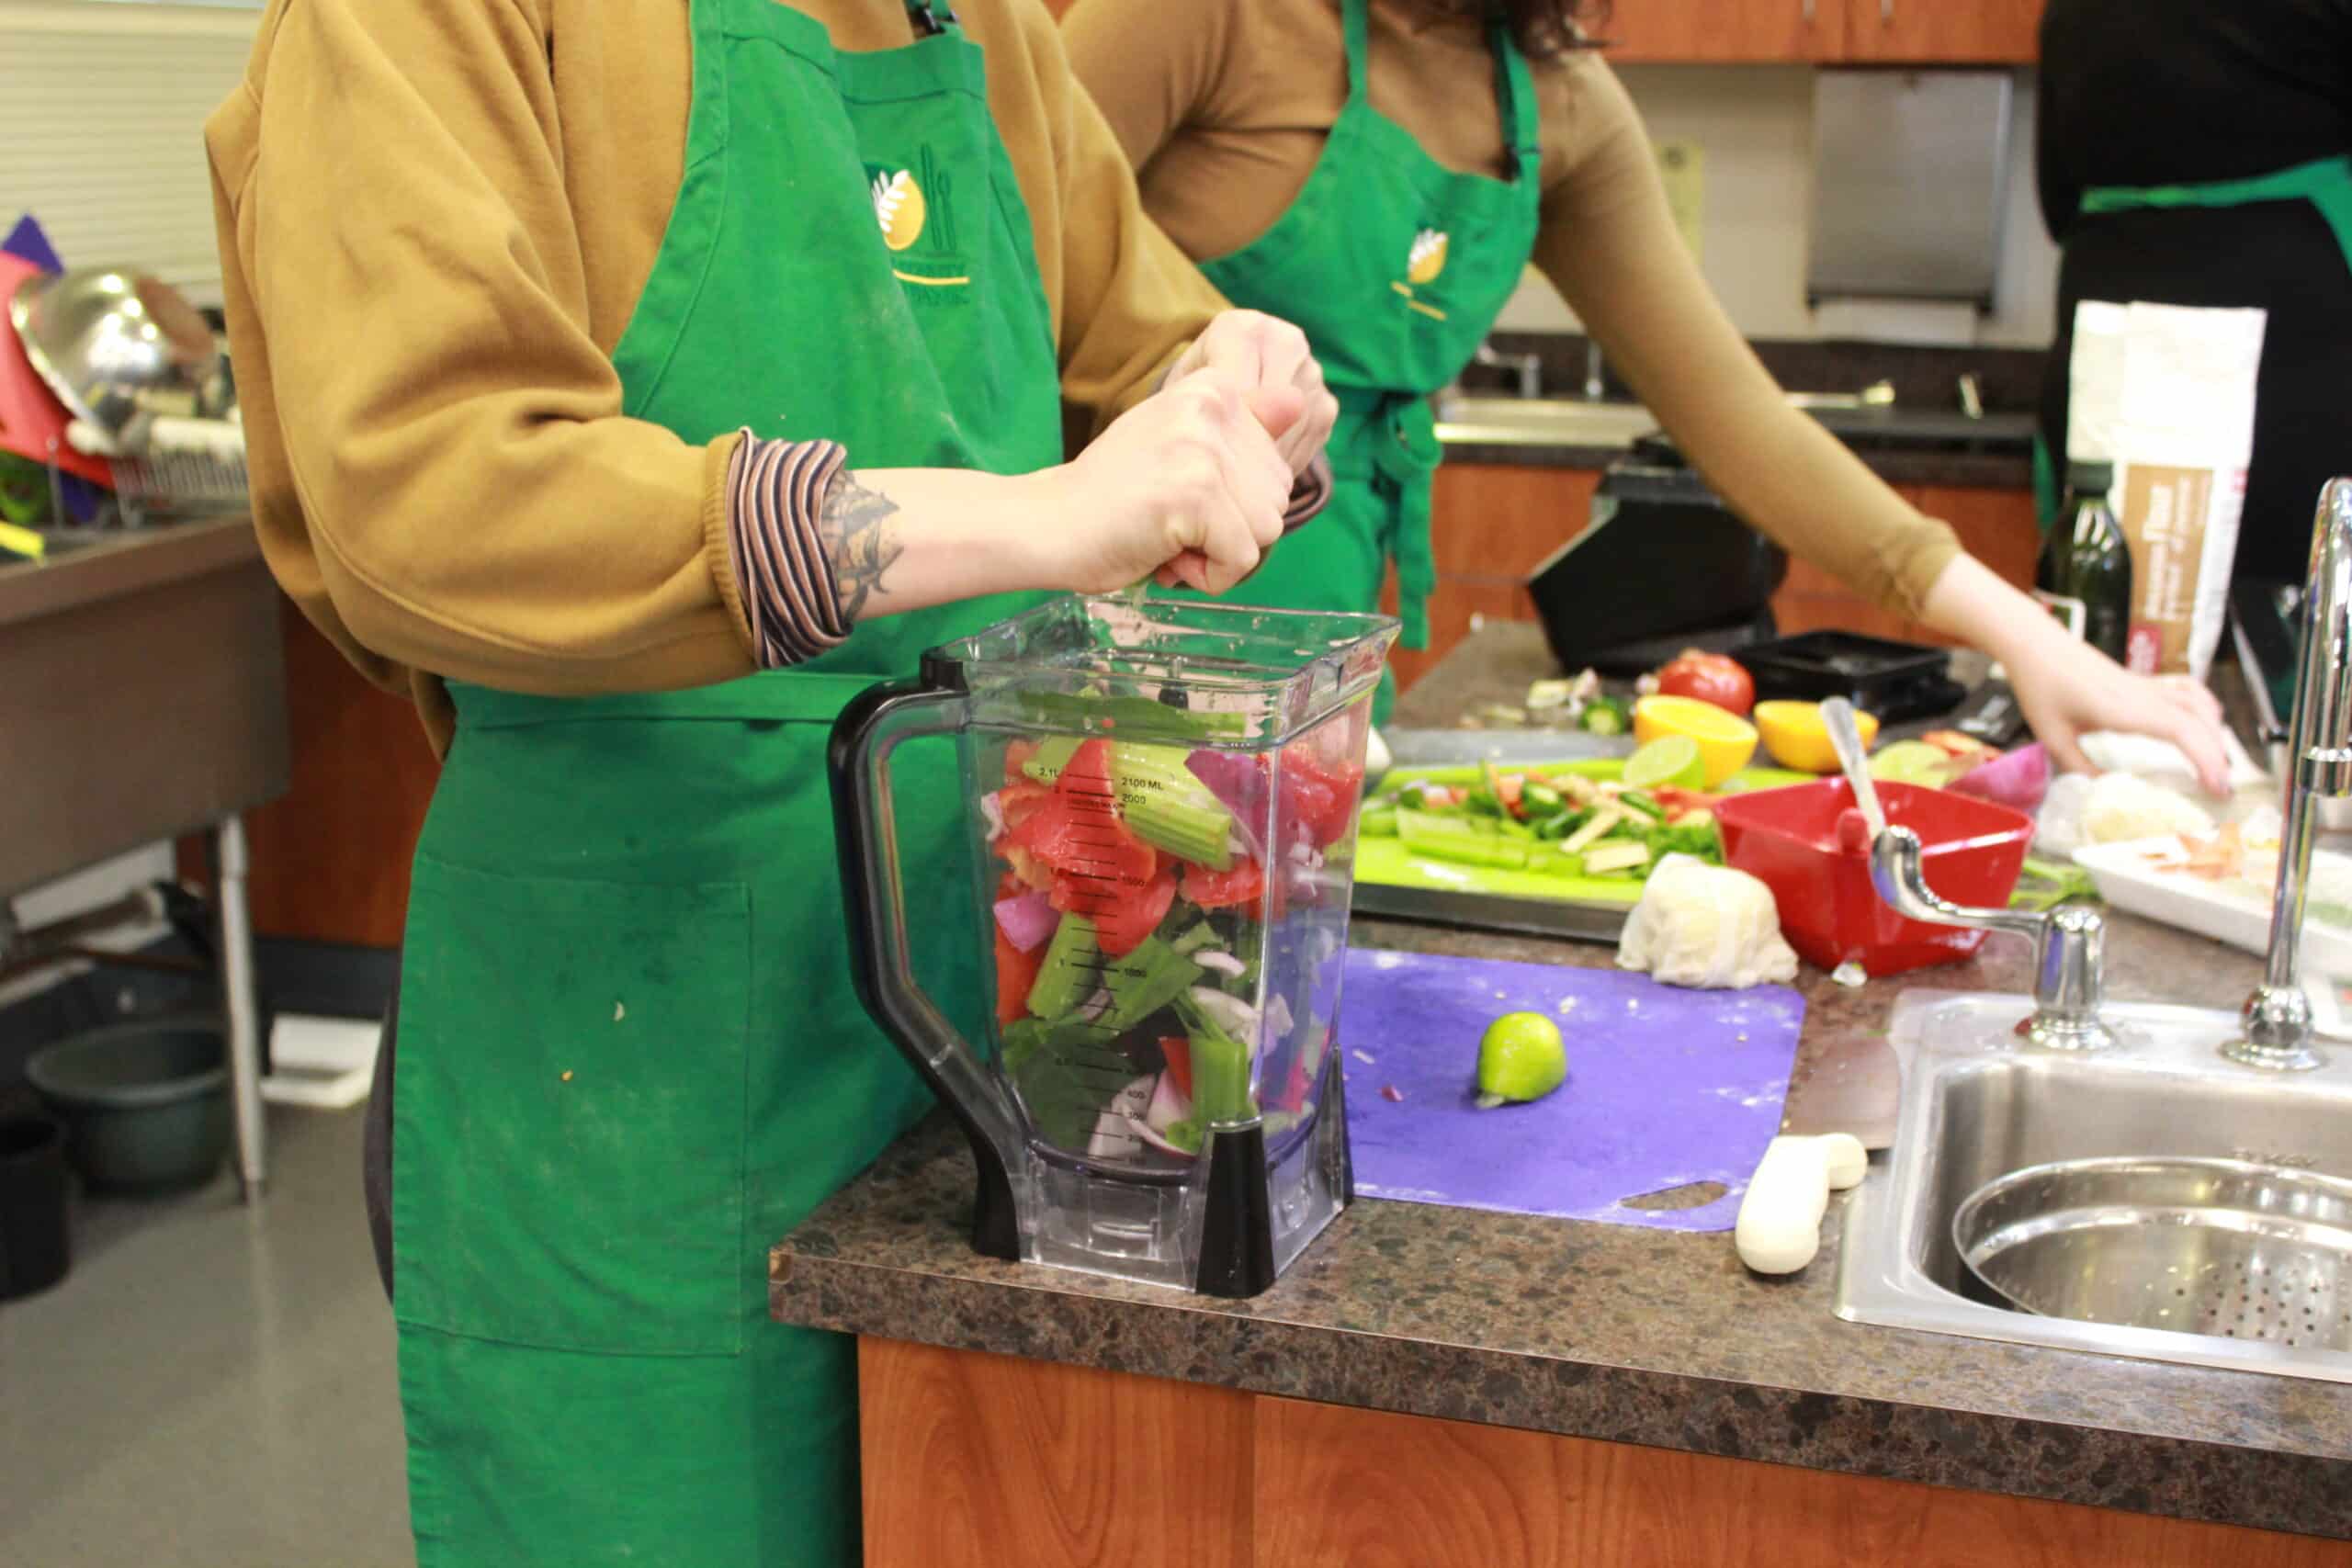 A person in a green apron prepares food next to a blender